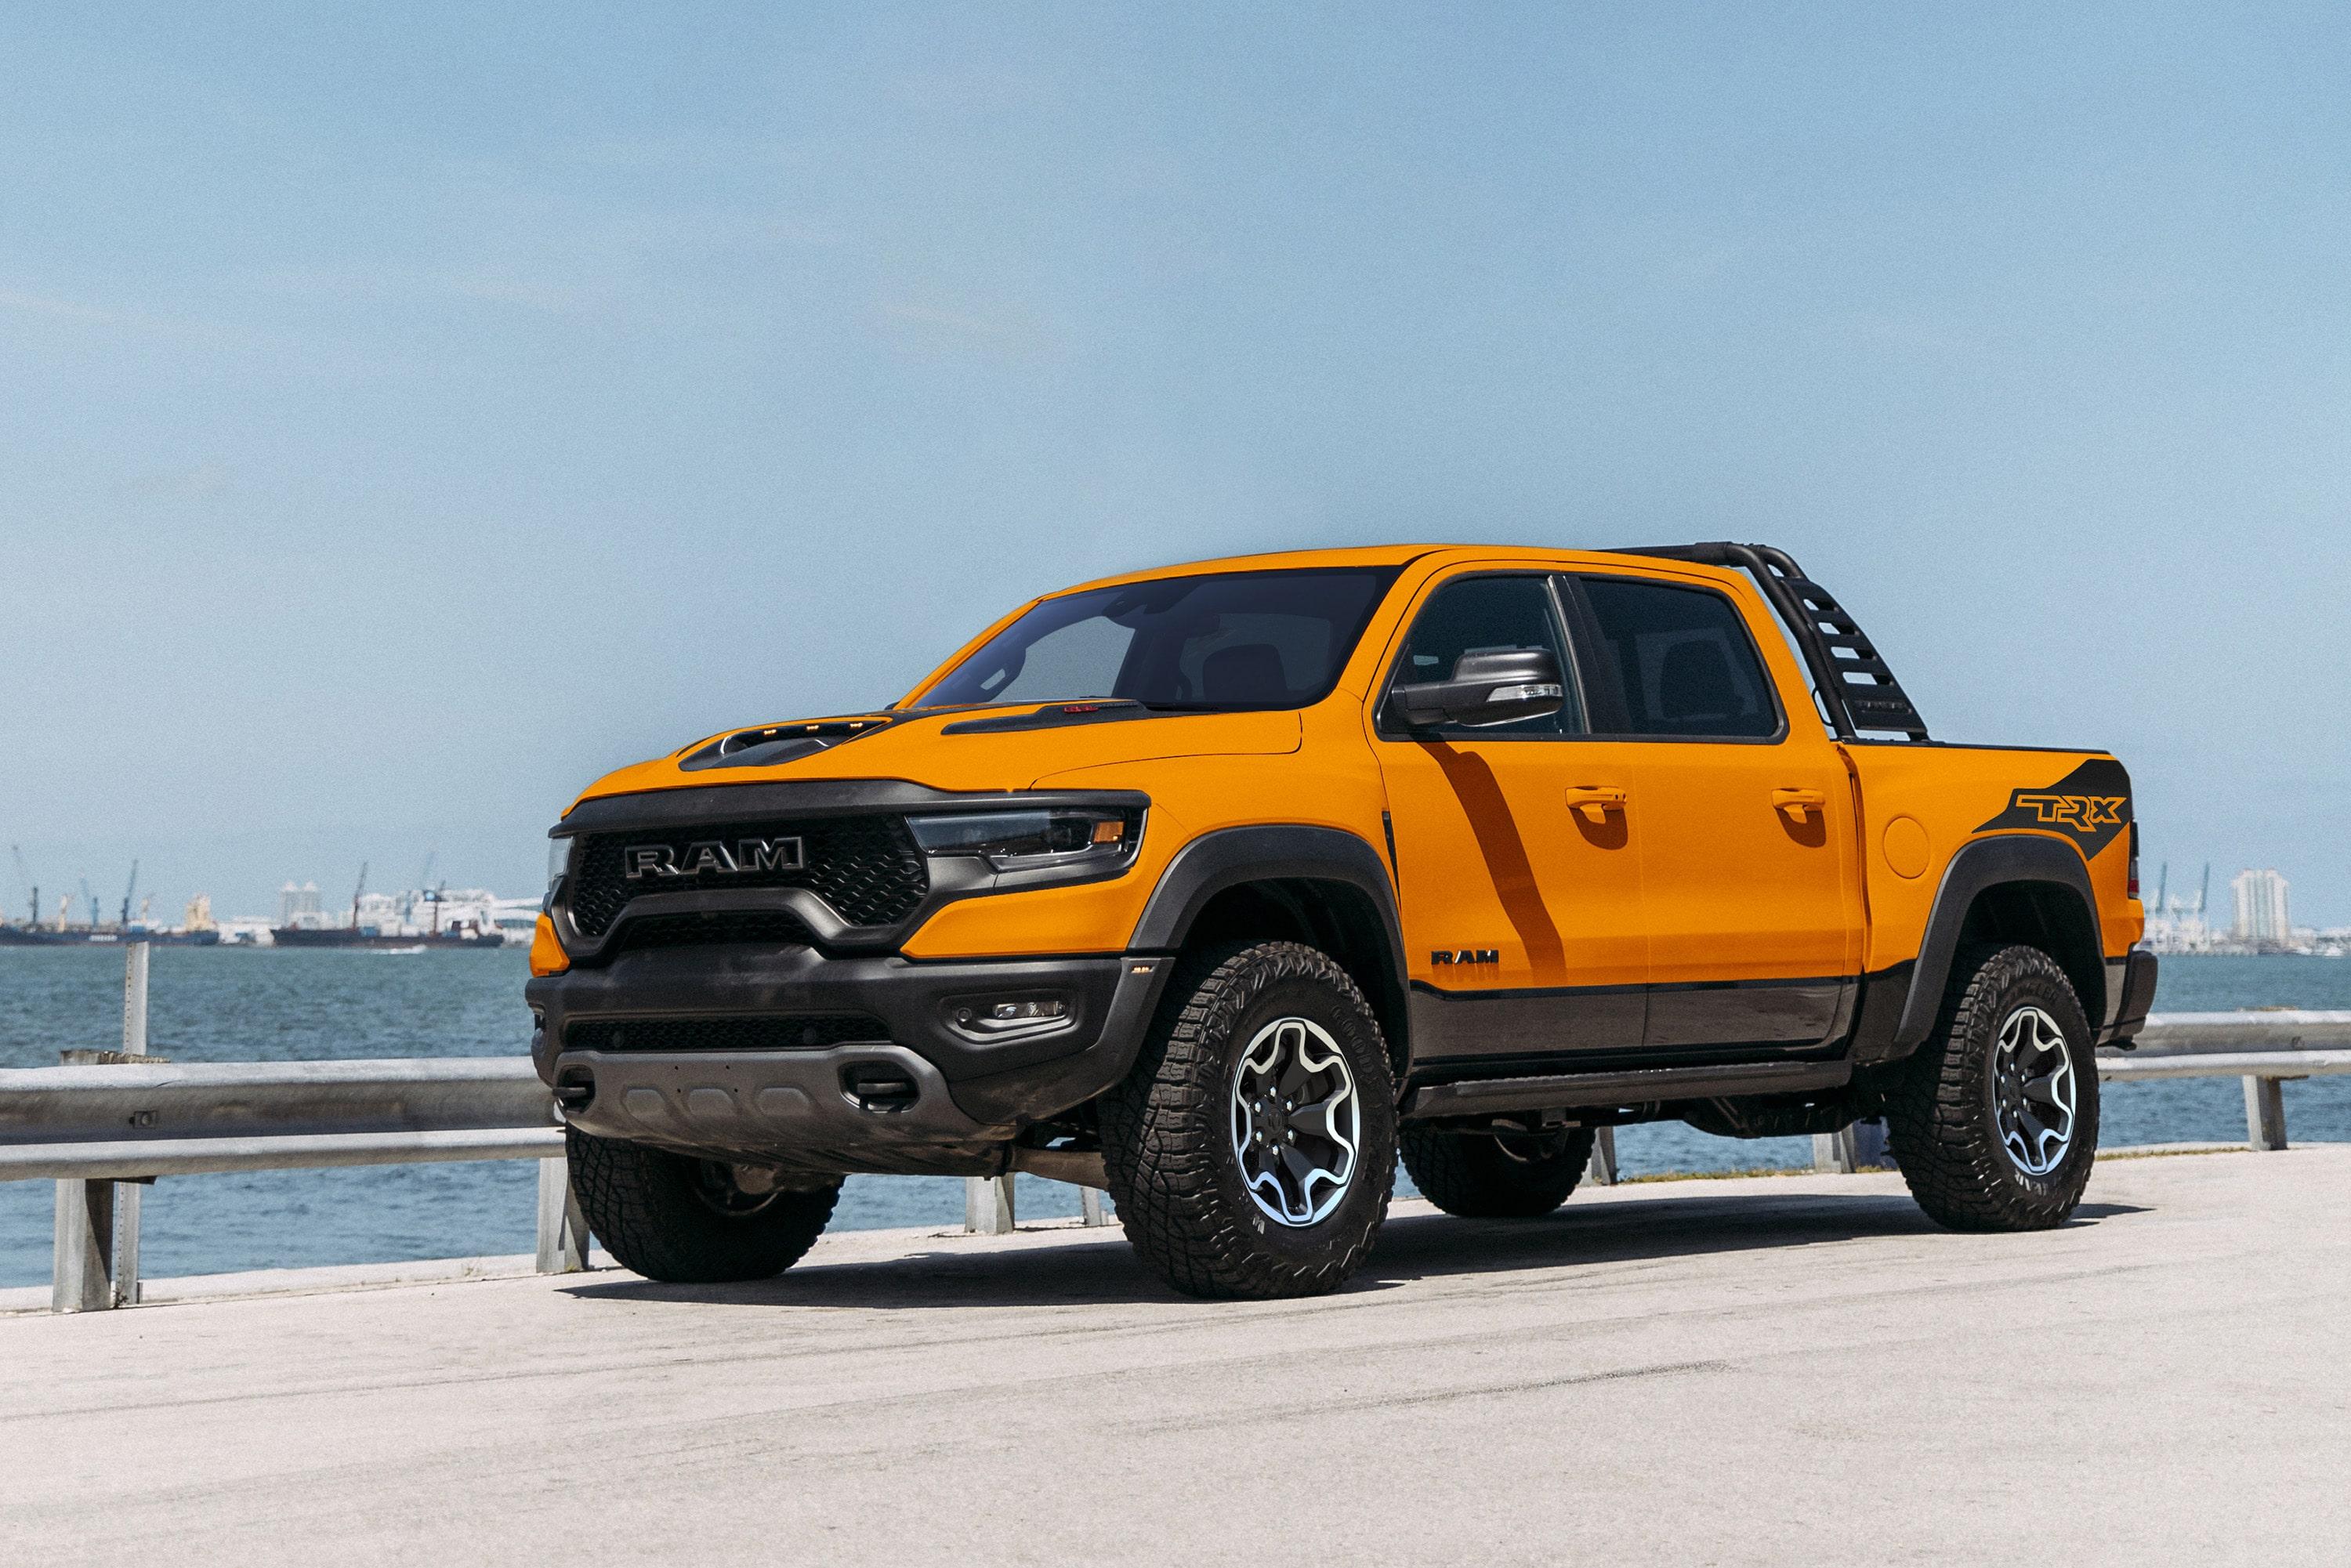 The 2022 Ram 1500 TRX Ignition Edition features striking orange paint.